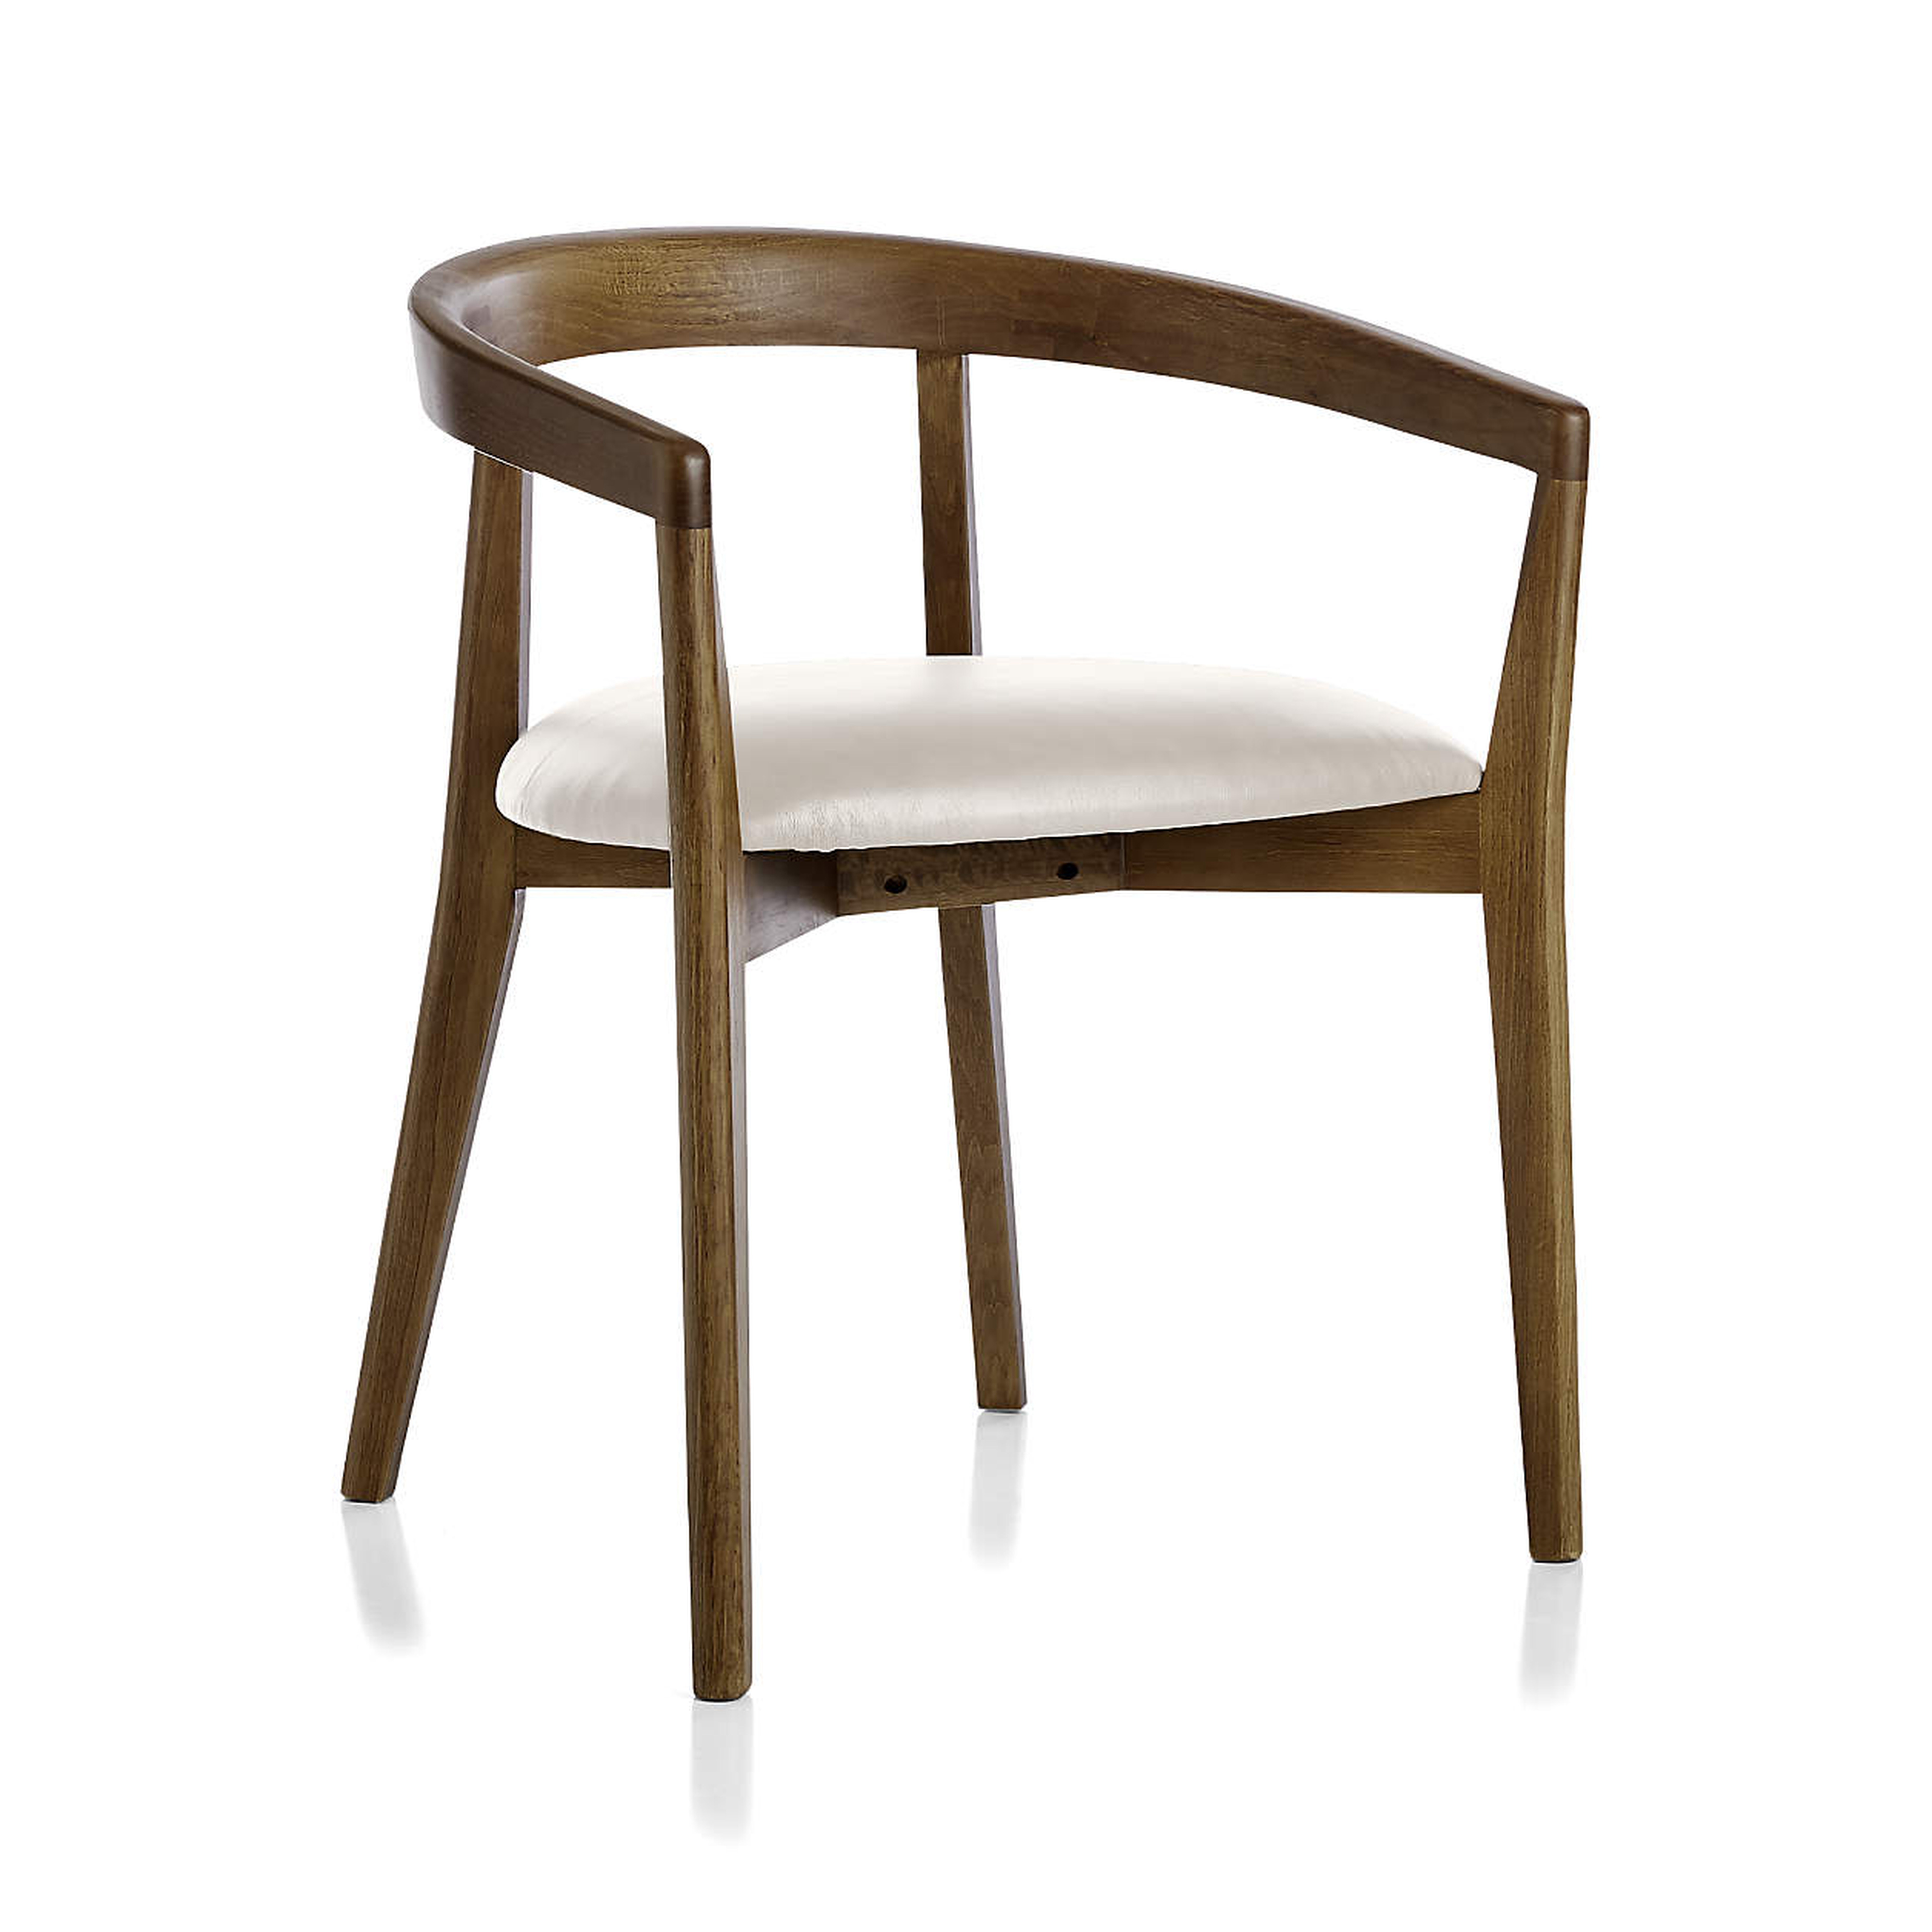 Cullen Shiitake Sand Round Back Dining Chair - Crate and Barrel